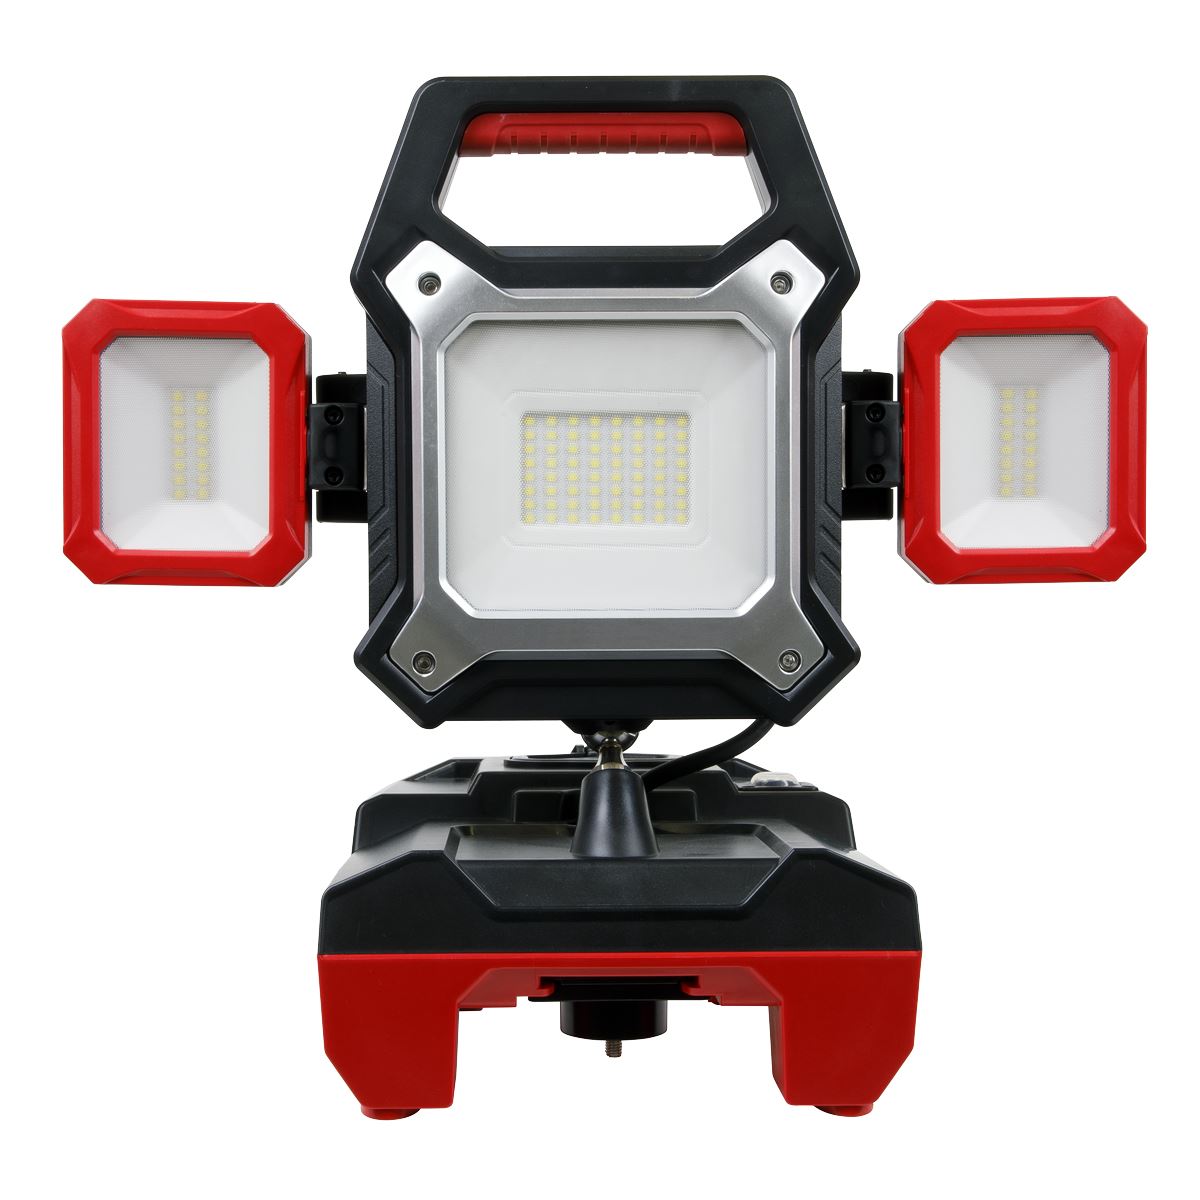 Sealey Cordless 20V SV20 Series 2-in-1 45W SMD LED Worklight - Body Only